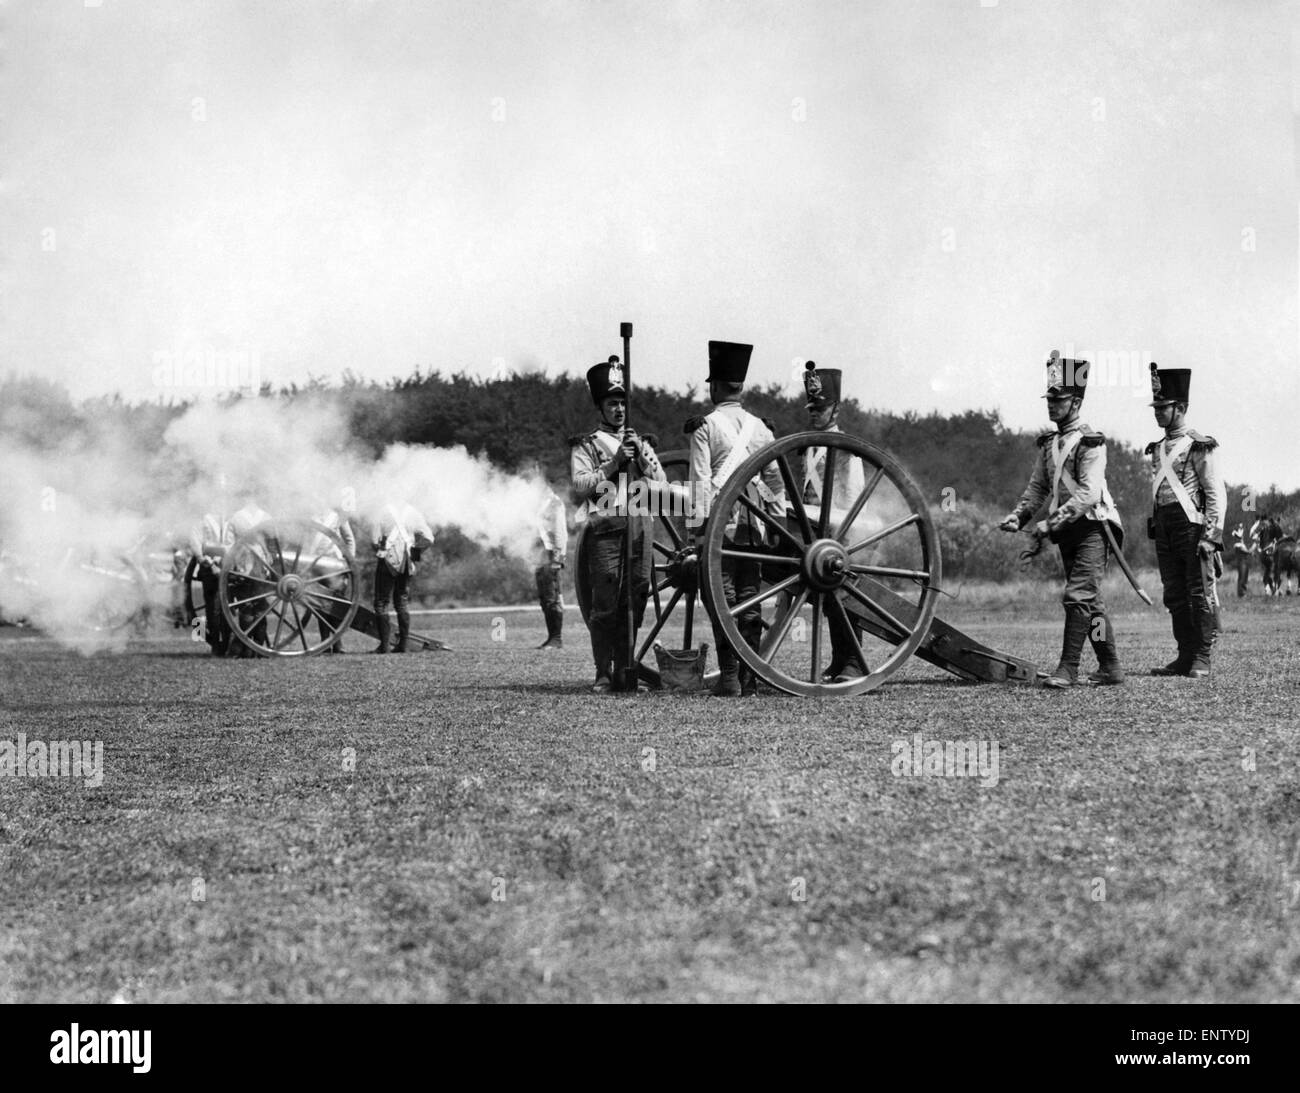 Army  British 1930s Aldershot Searchlight Tattoo Rehearsal A full dress  rehearsal of the Searchlight Tattoo which begins on June 18 was held  yesterday May 23rd 1932  at Aldershot Napoleons artillery Stock Photo   Alamy